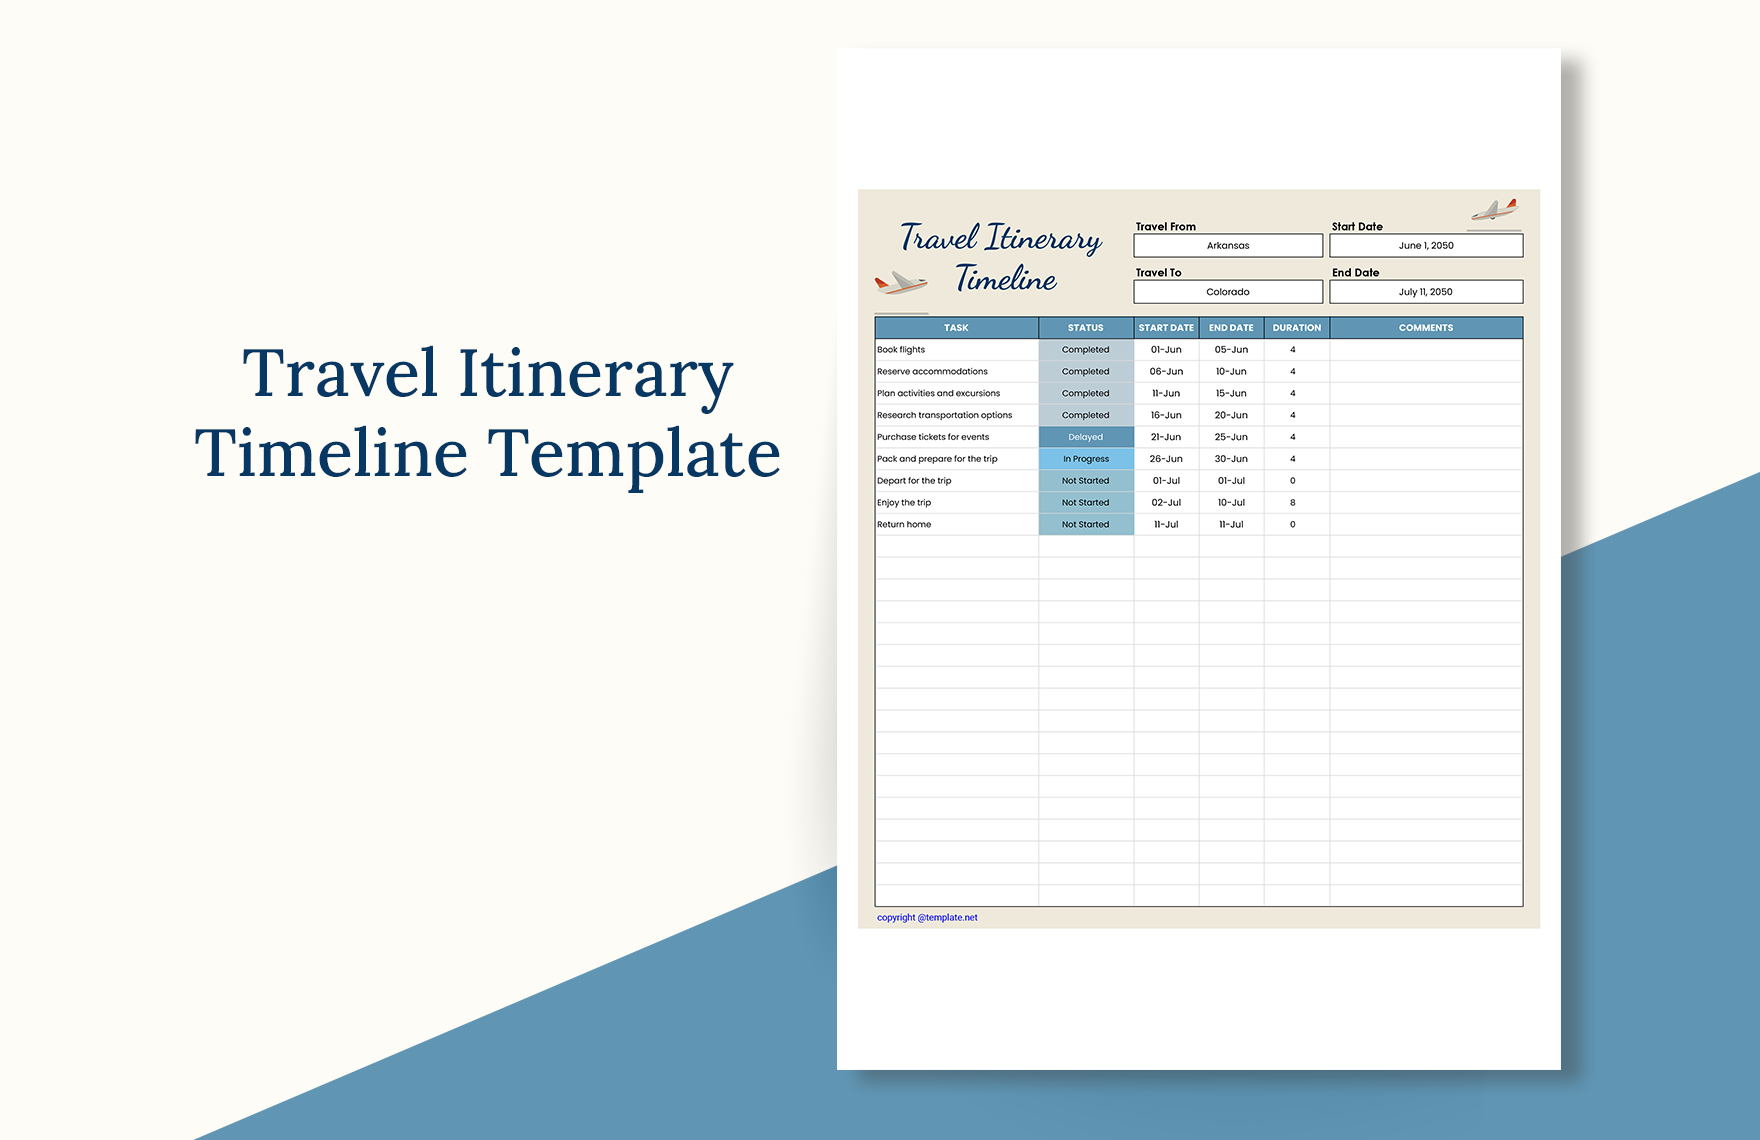 Travel Itinerary Timeline Template Download in Excel, Google Sheets